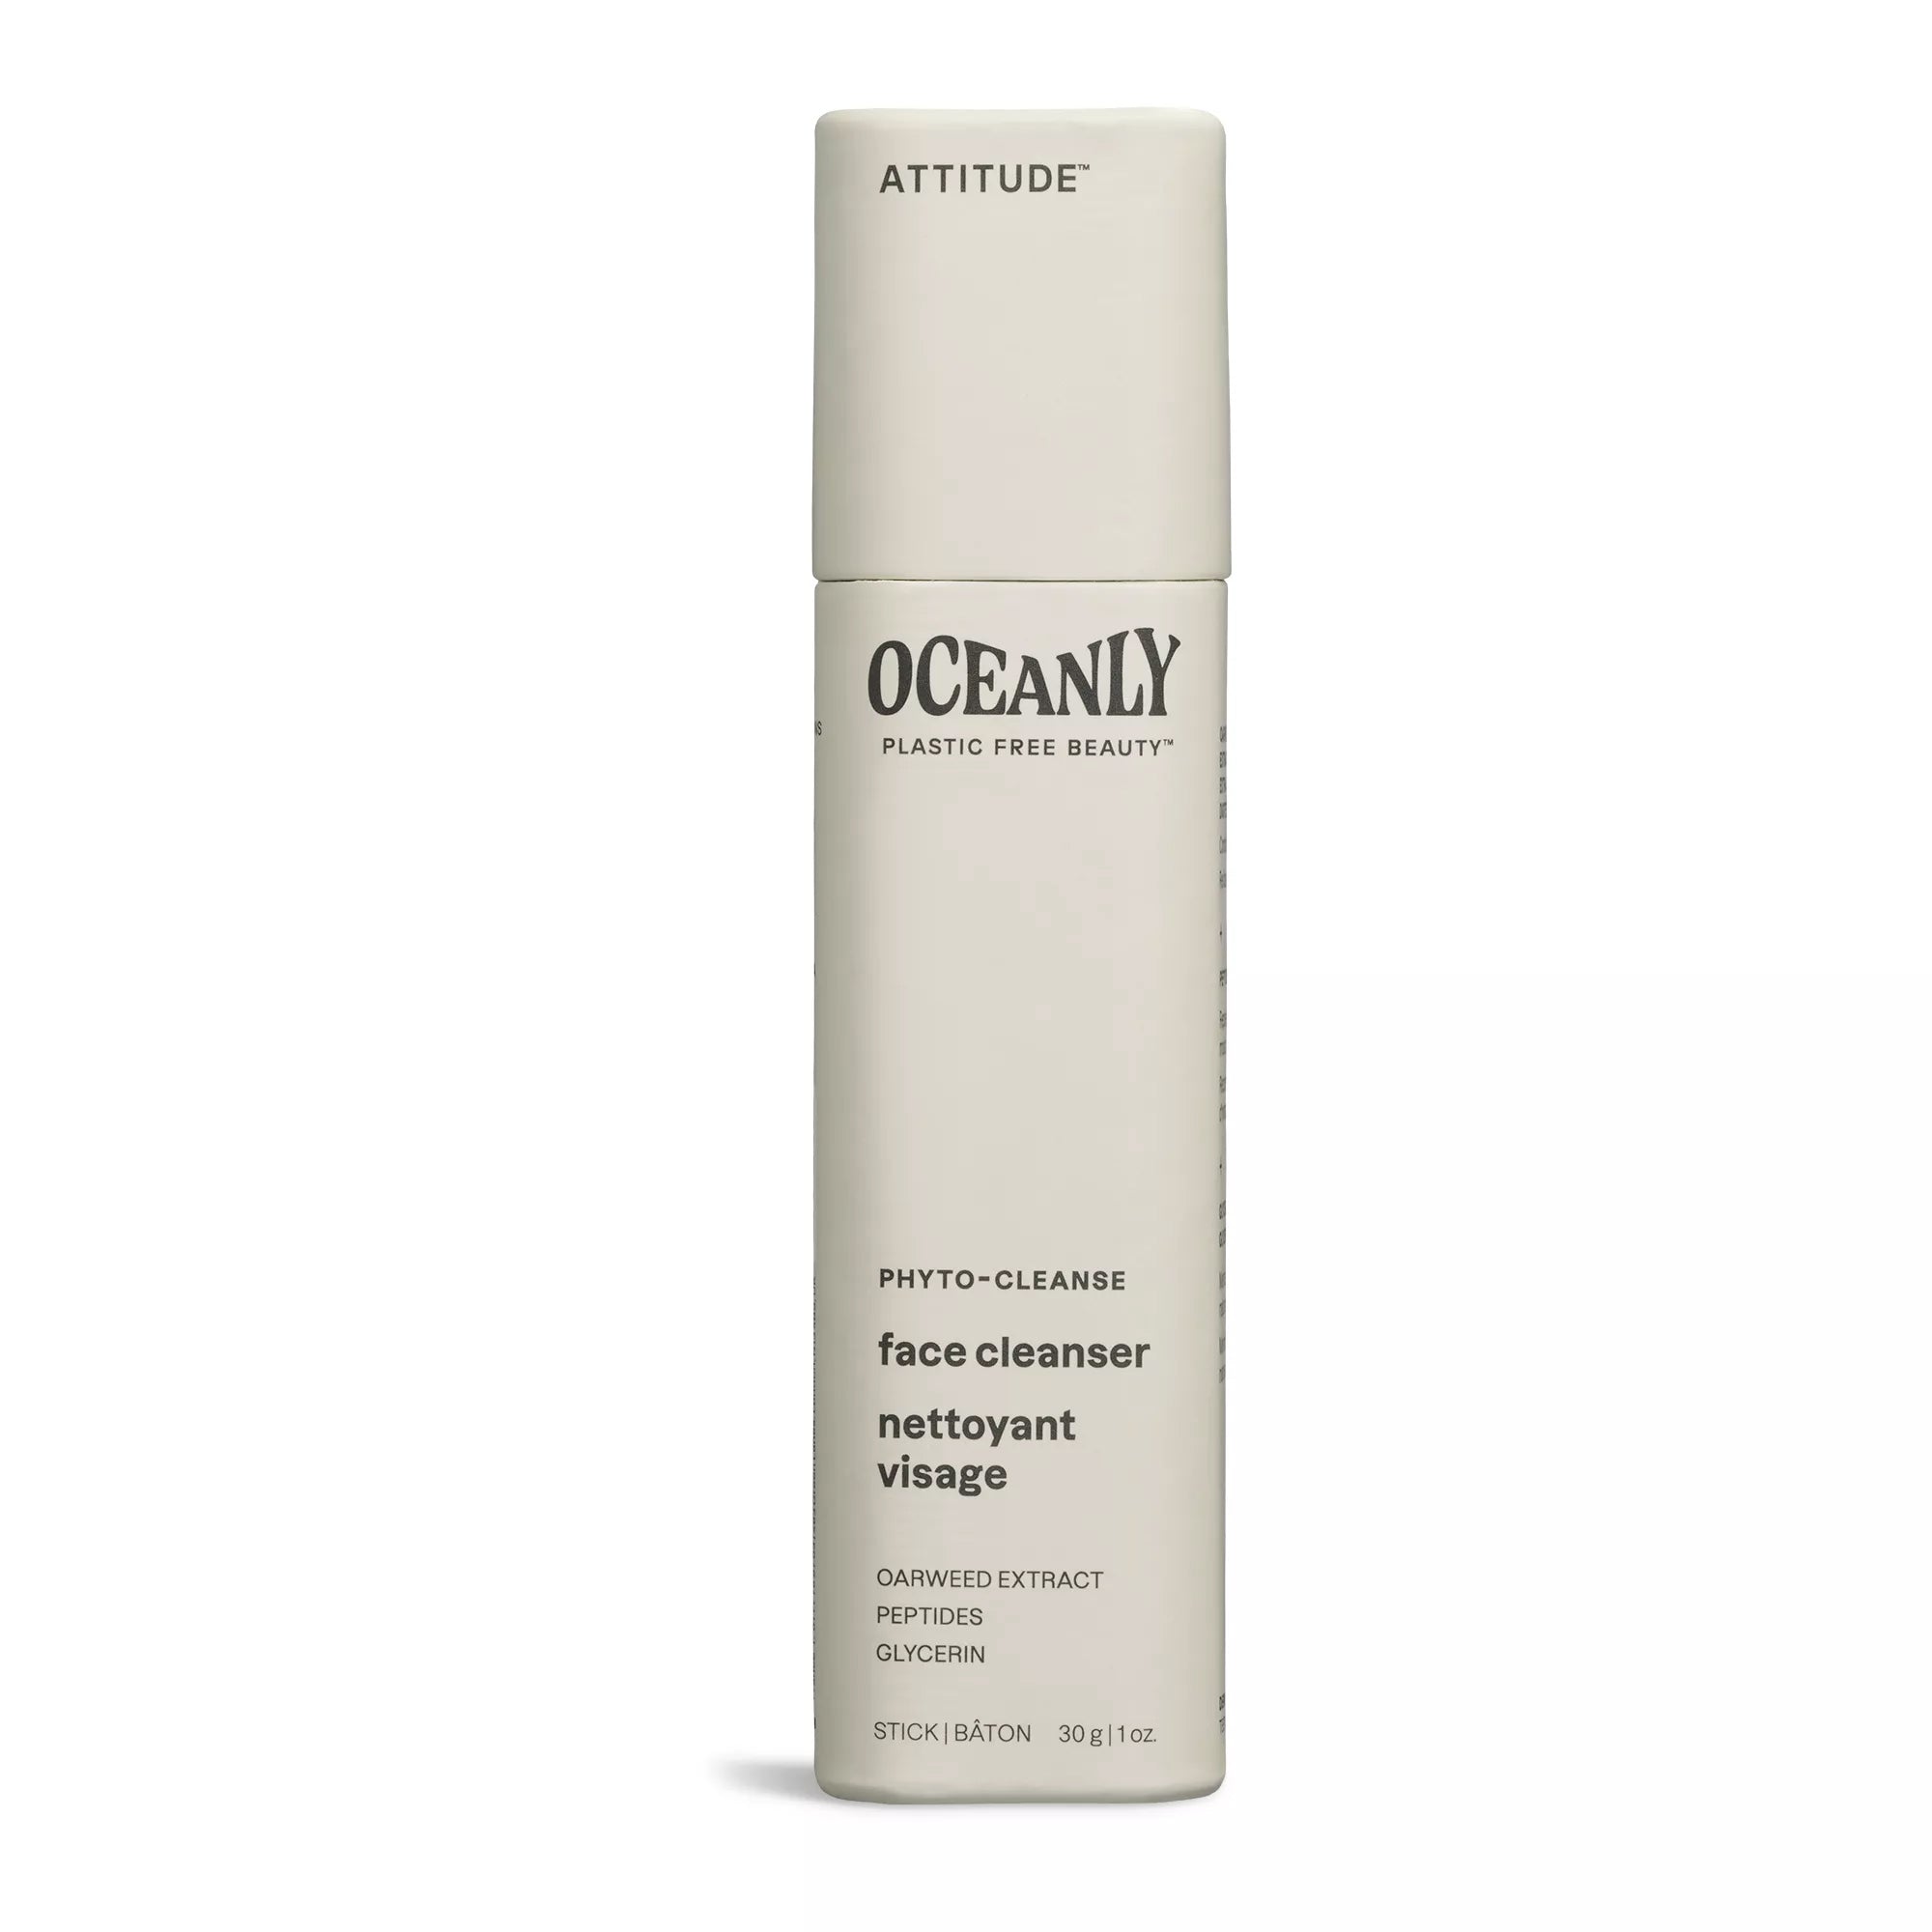 ATTITUDE Oceanly Phyto-Cleanse Face Cleanser Unscented 30g 16064_en?